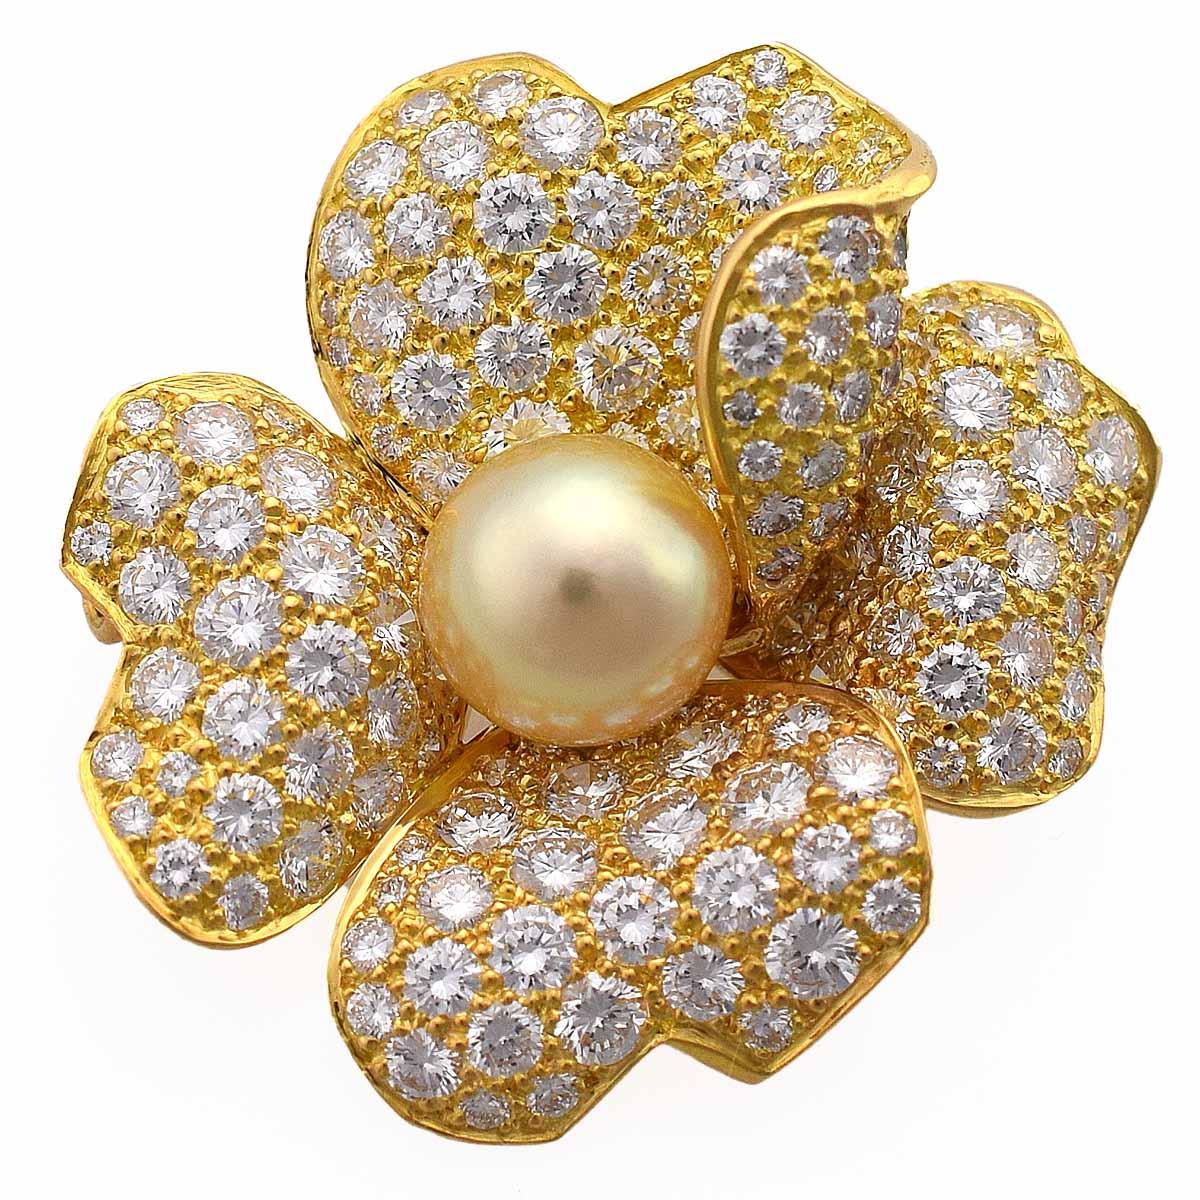 Brand:Cartier
Name:Paiva clip brooch
Material:1P pearl, diamond,750 K18 YG yellow gold
Weight:9.9g（Approx)
Size:H25×W30mm / H0.98in×W1.18in（Approx)
Comes with:Cartier Case, Copy of Cartier Repair Certificate (Feb 2021)
Comment:Pearl Diameter